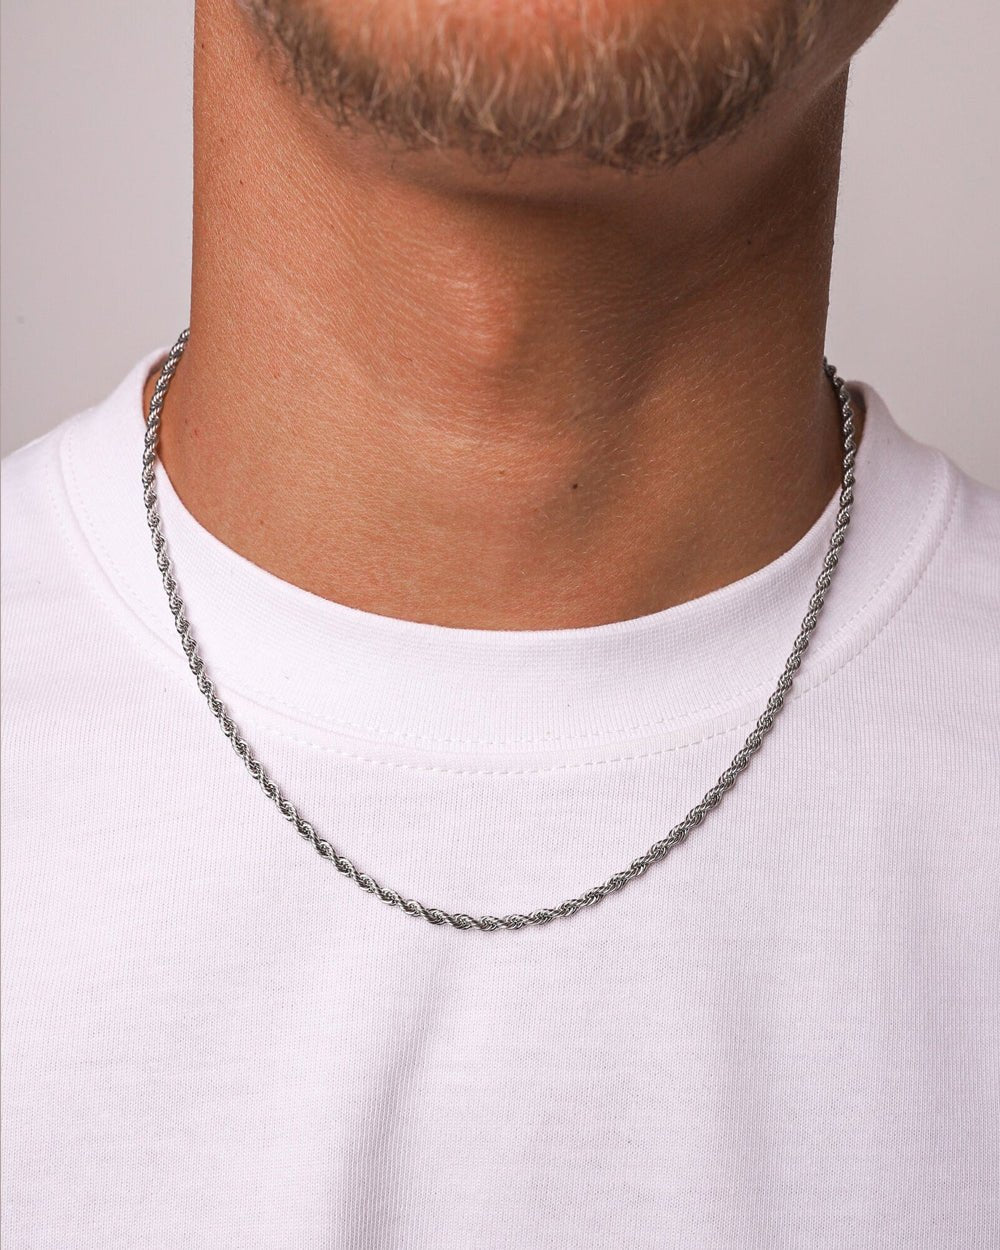 CLEAN ROPE CHAIN. - 3MM WHITE GOLD